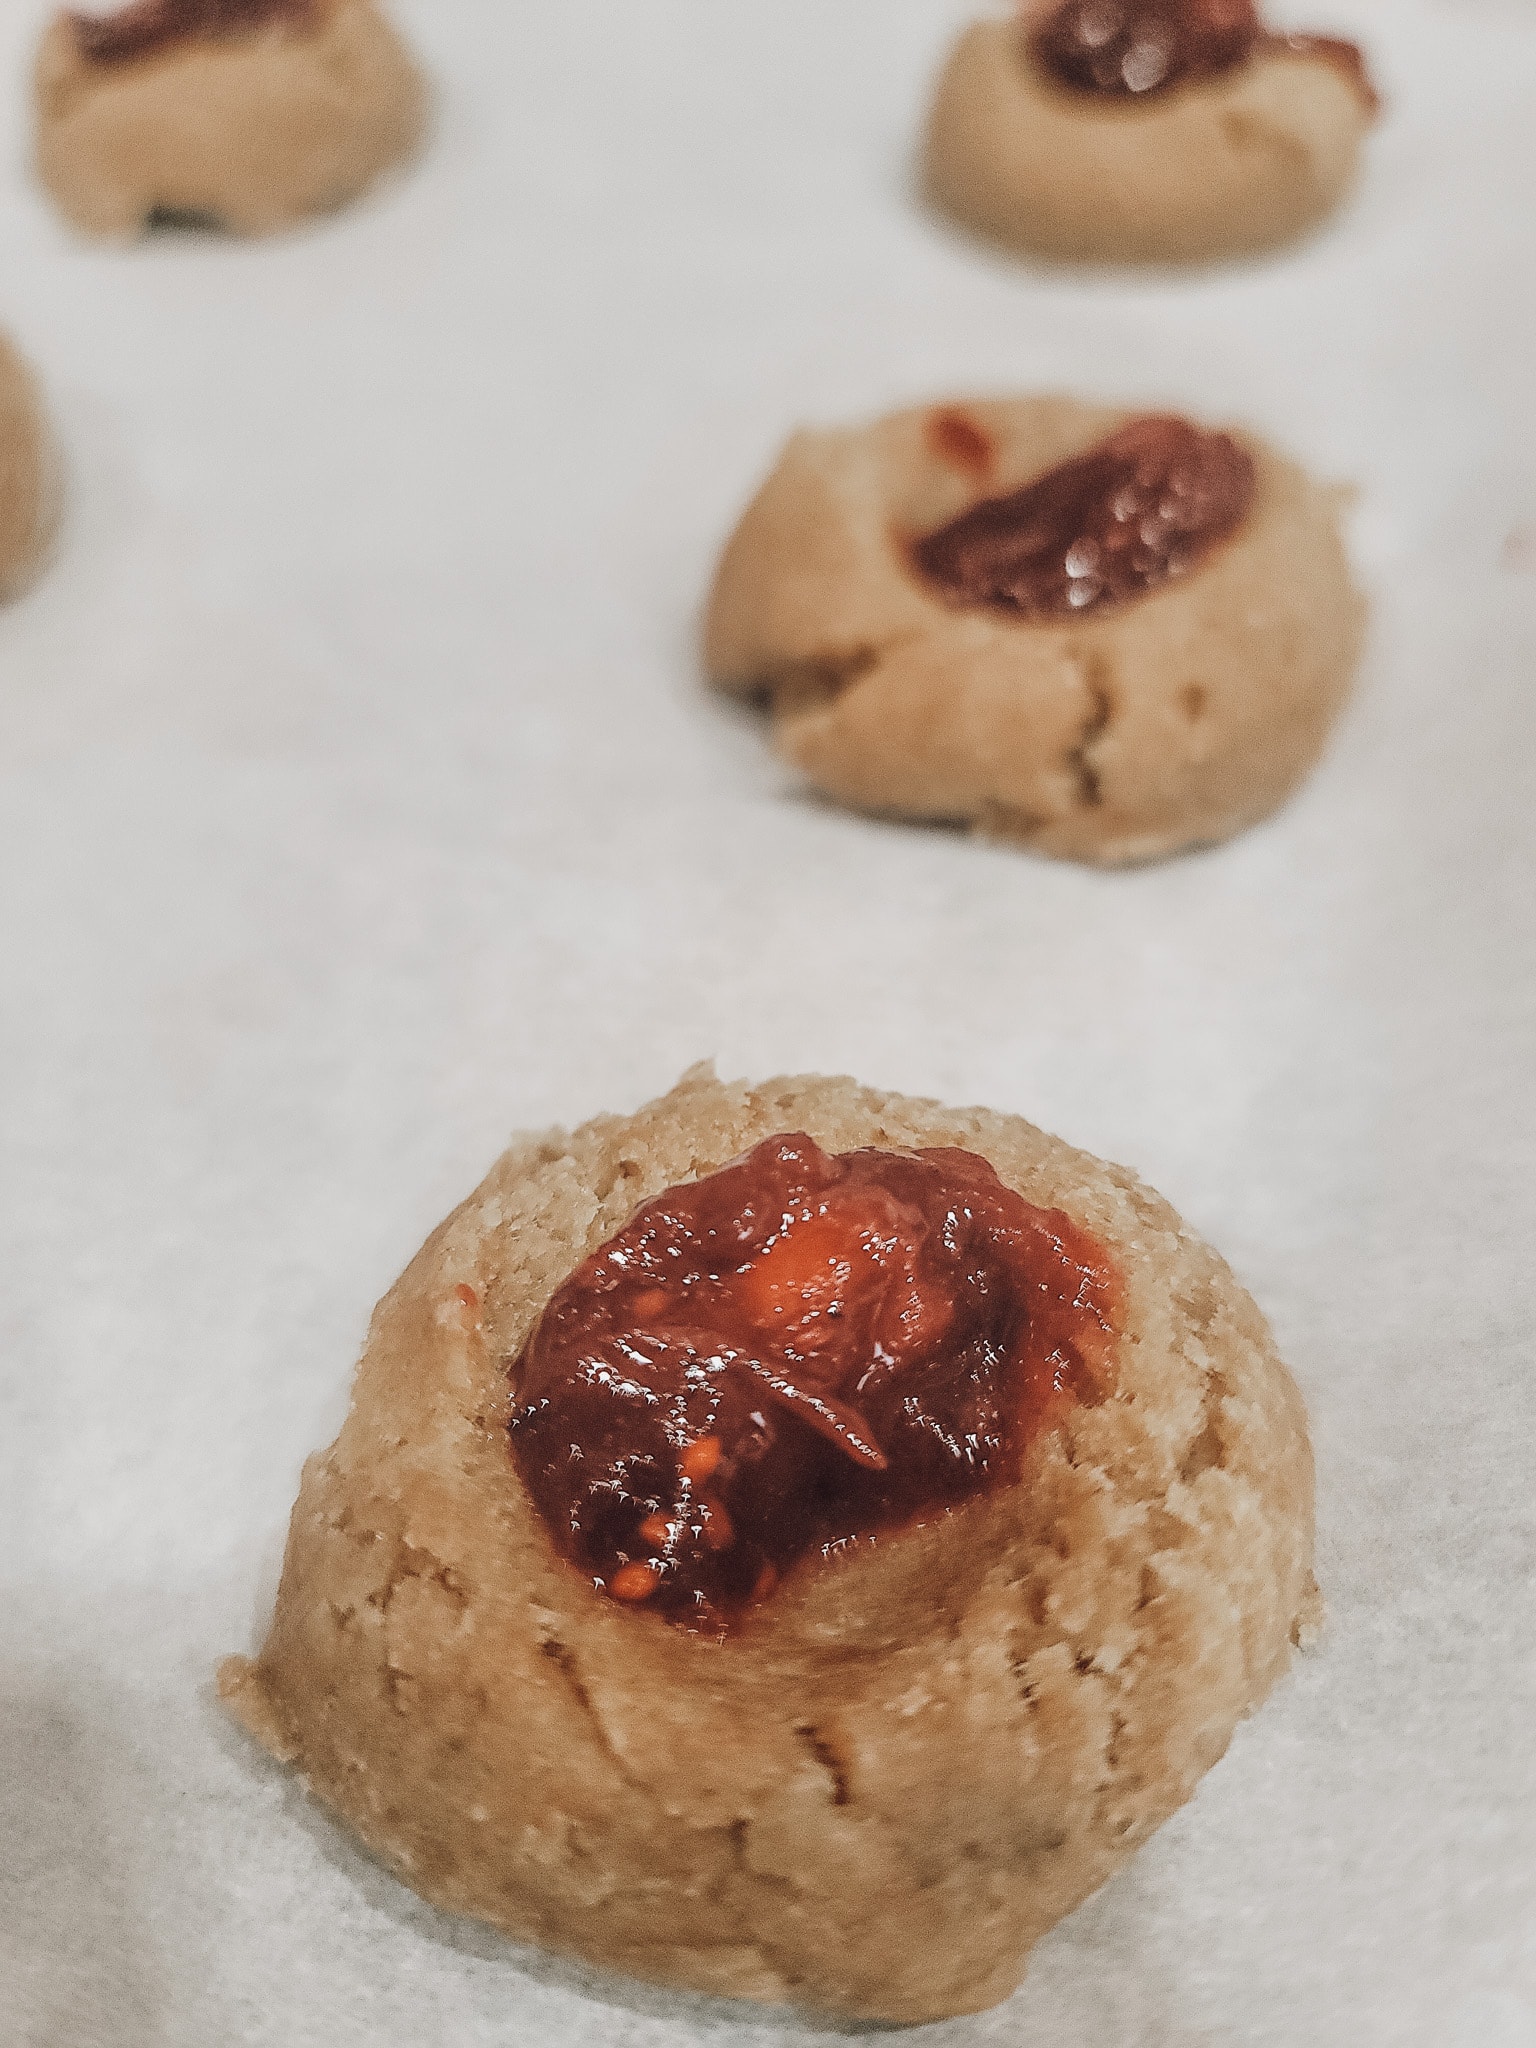 Place the dough ball on the baking sheet and use your thumb or the back of a measuring spoon to press an indentation into the dough ball. Spoon cranberry jam into the indention.